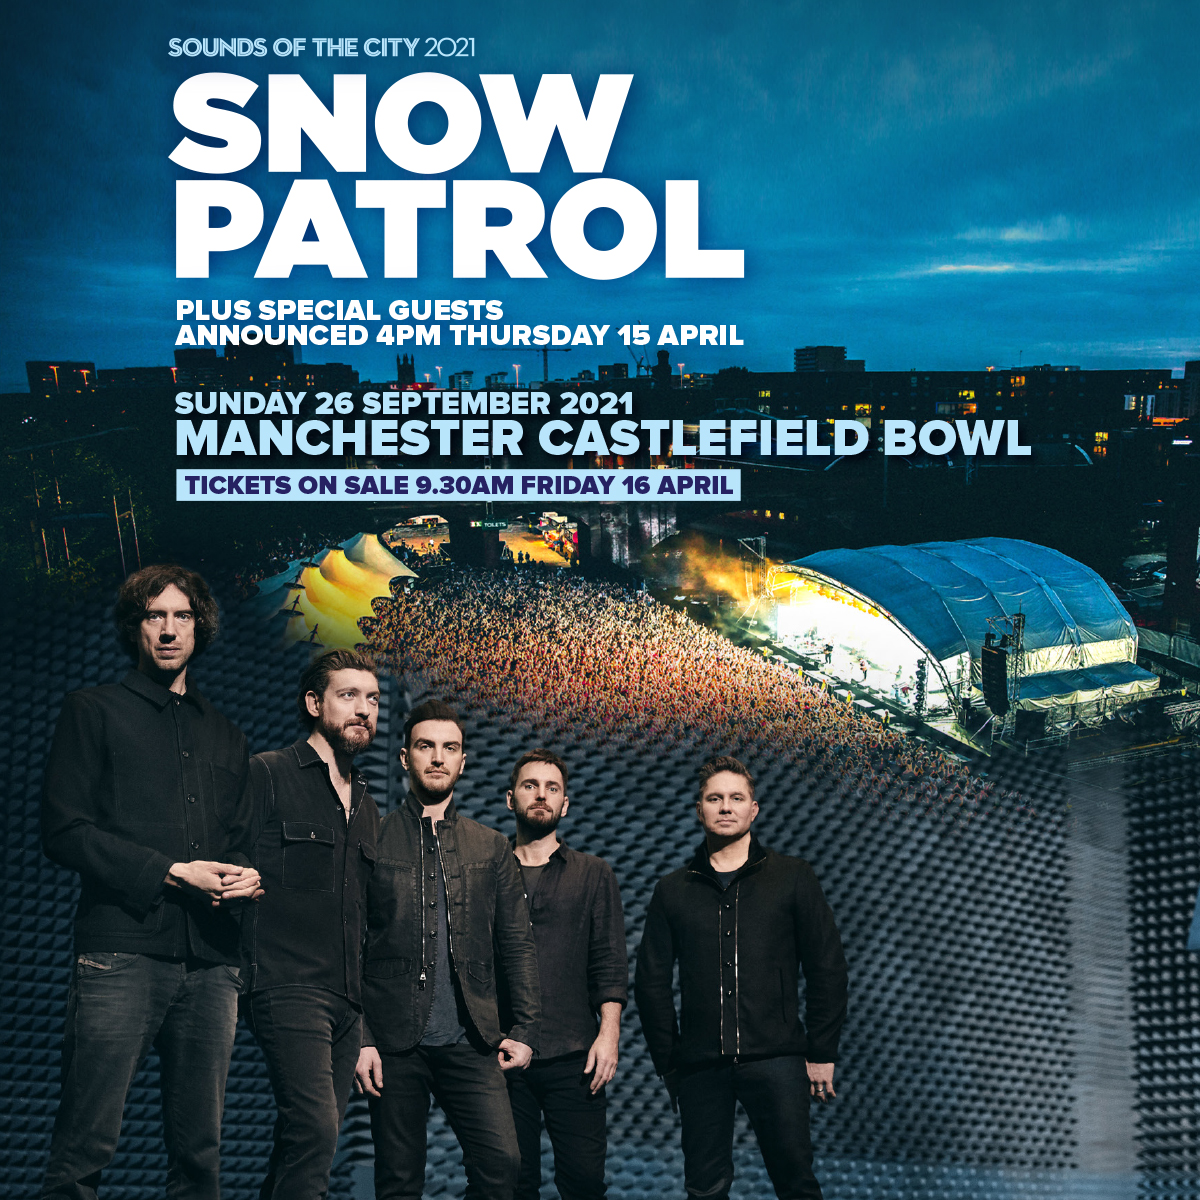 Manchester Date Announced!